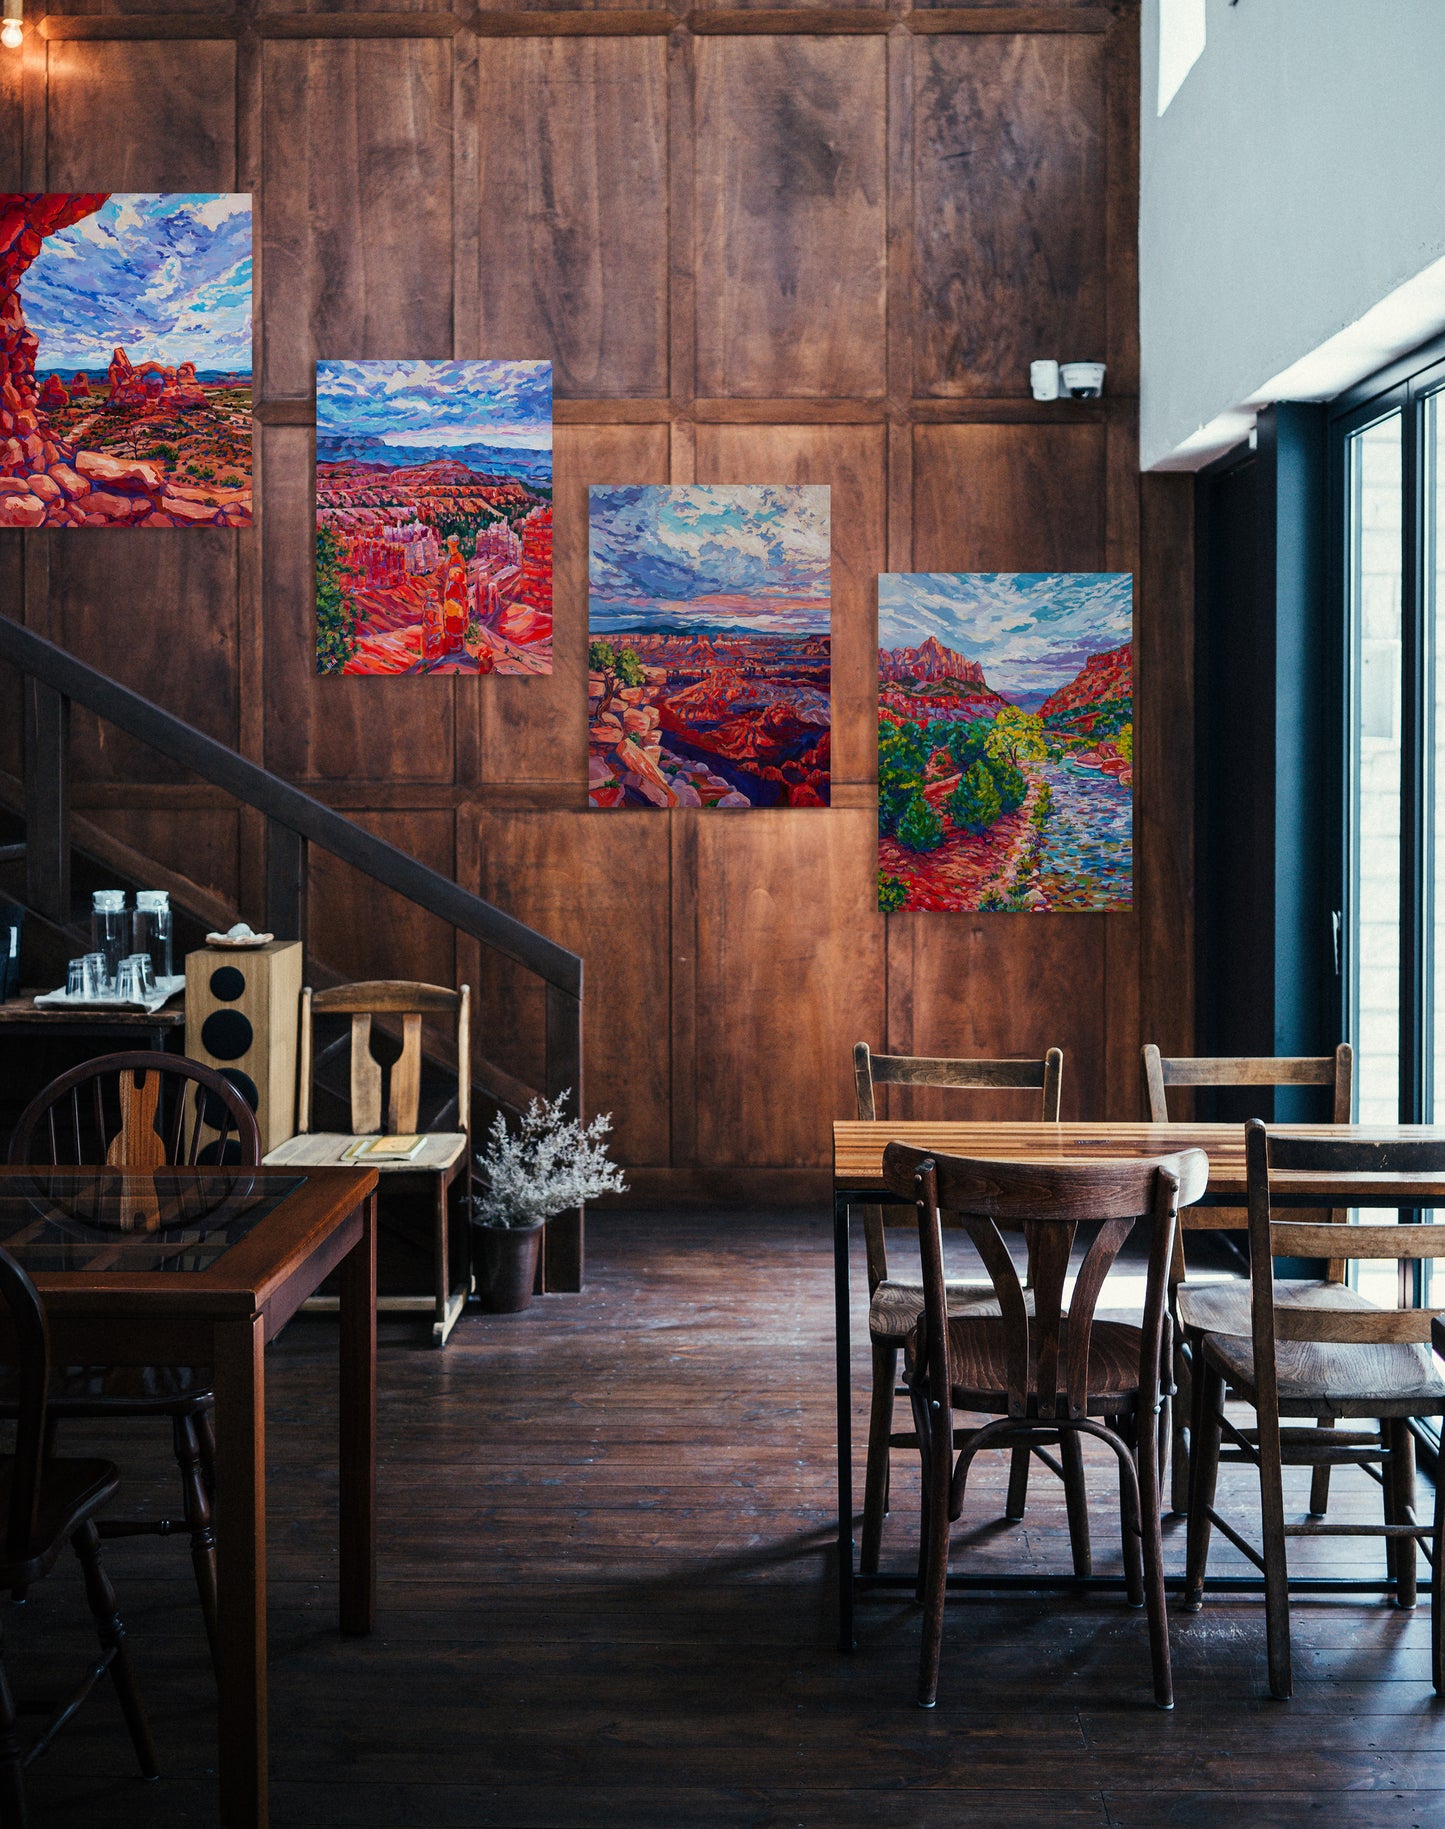 4 large paintings of Utah's National Parks on wall of a cafe space